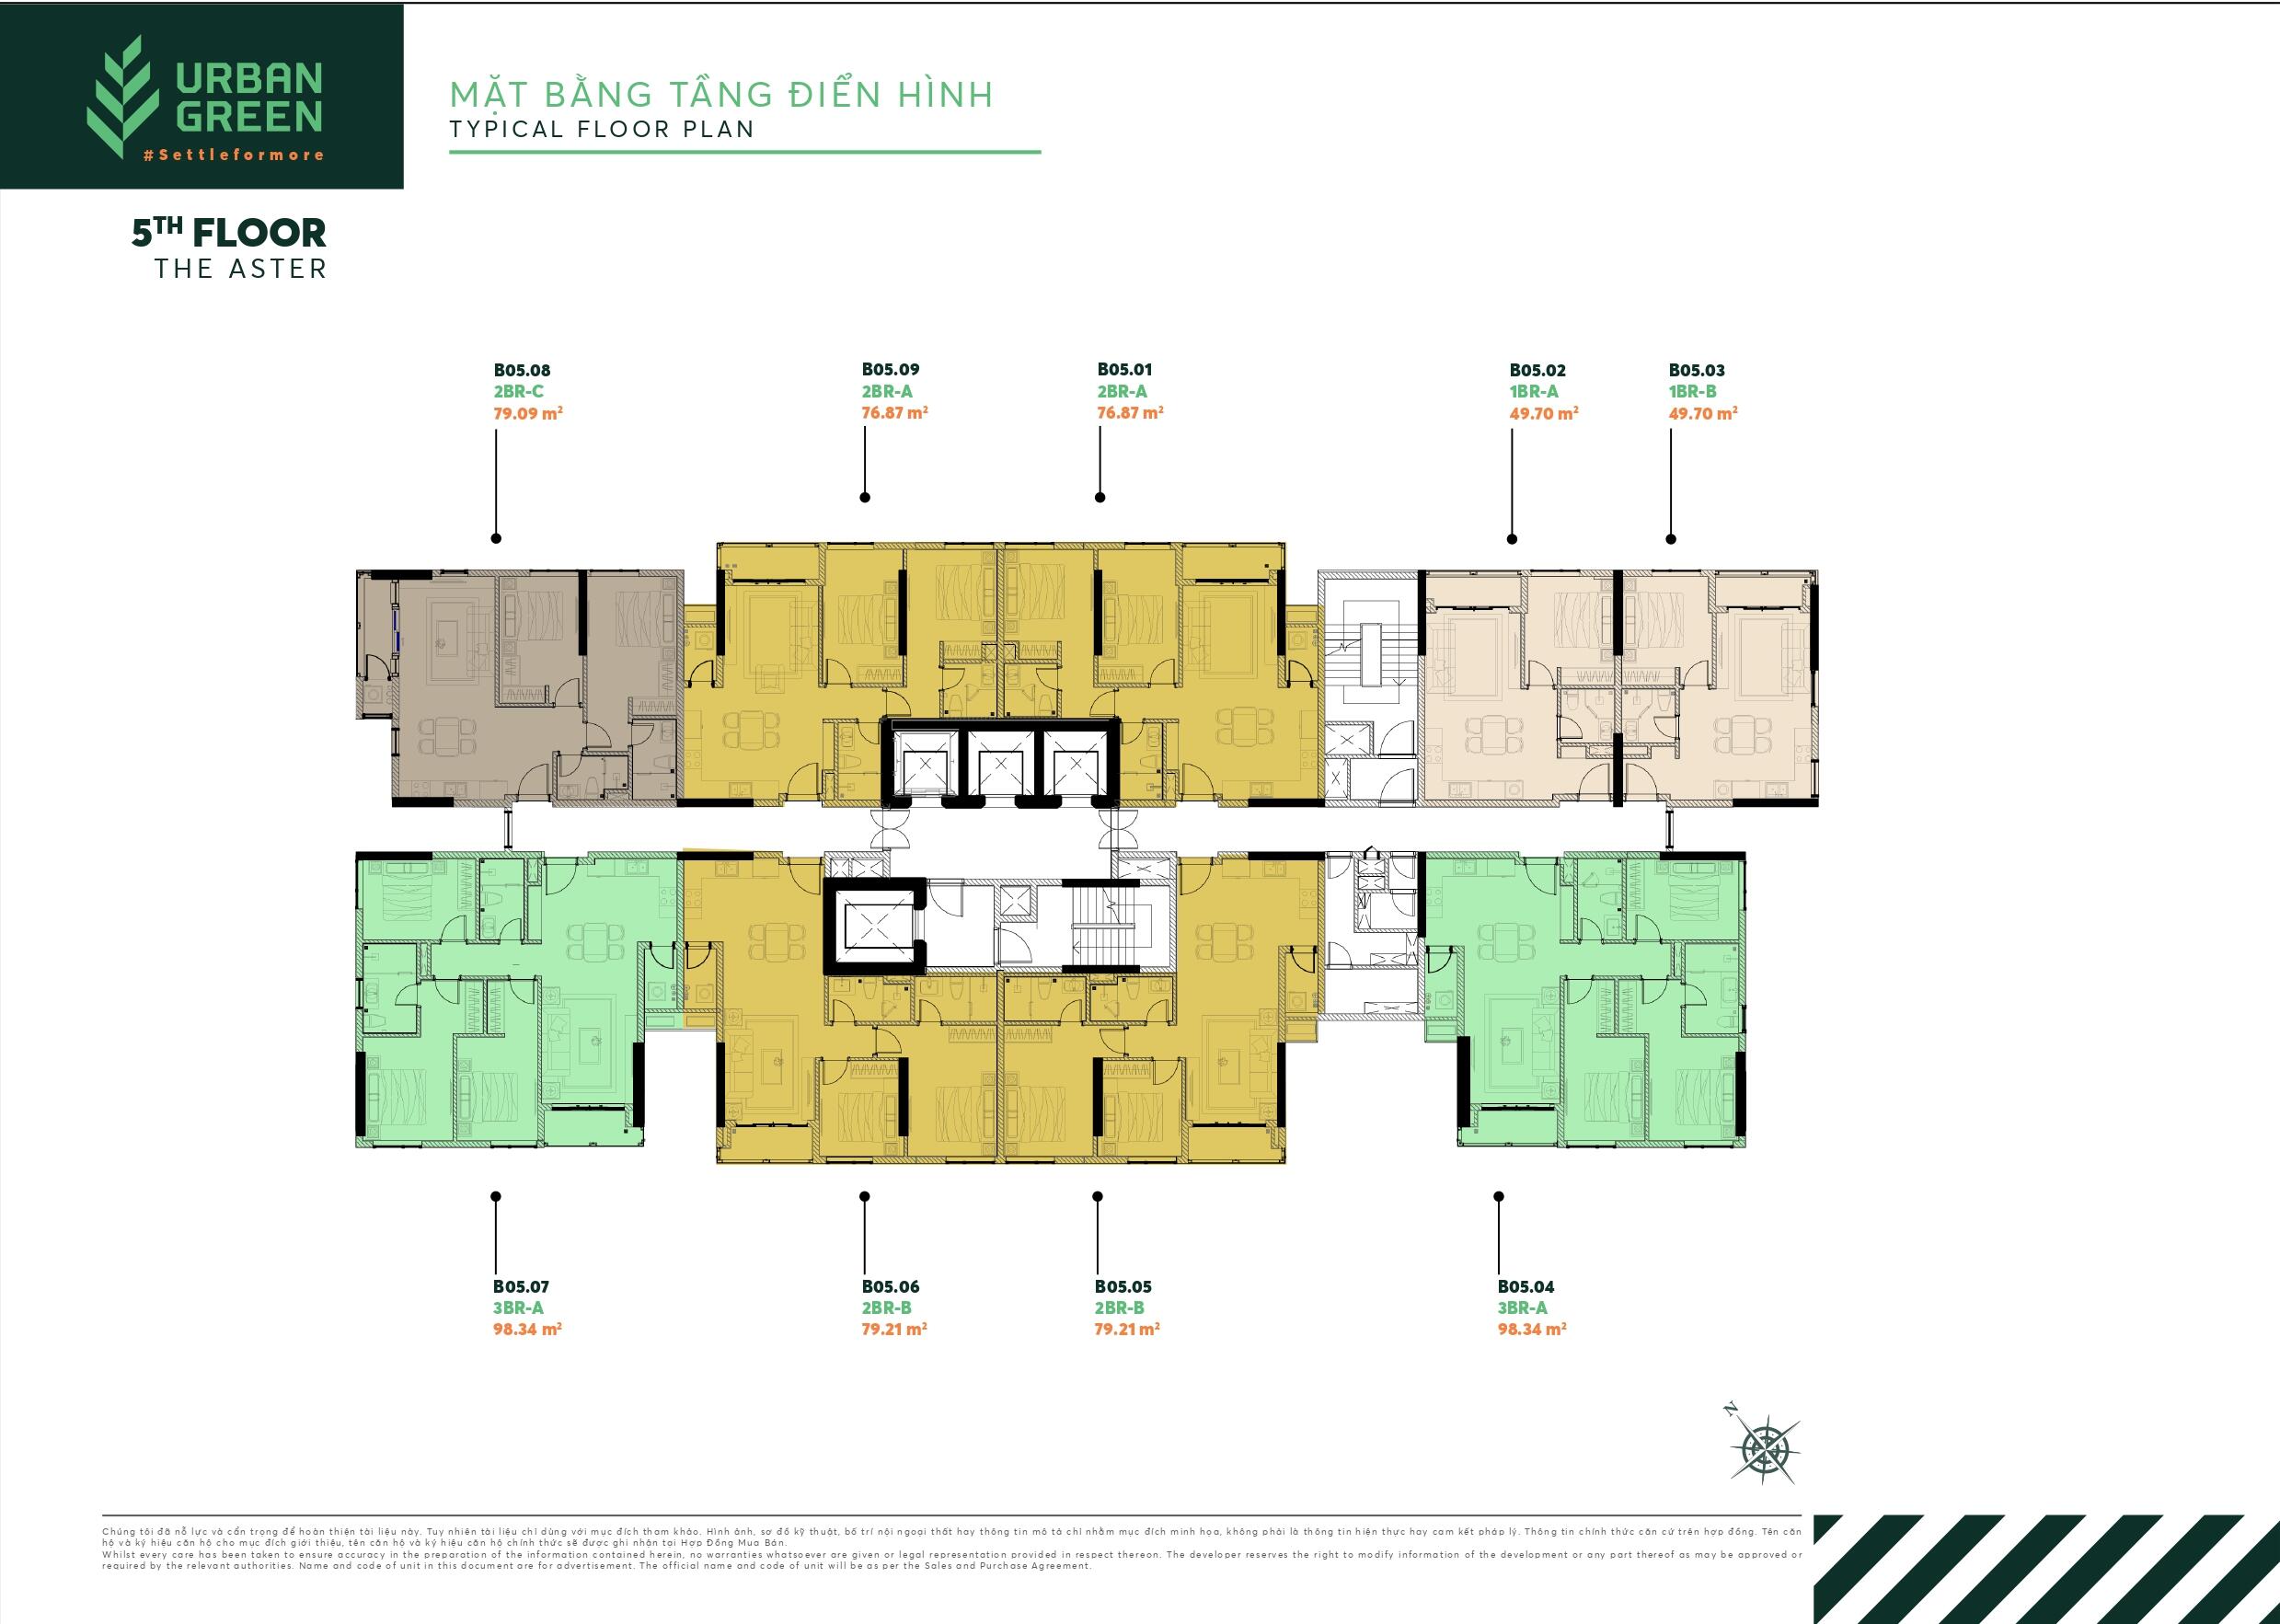 Typical floor plan of The Aster Urban Green tower